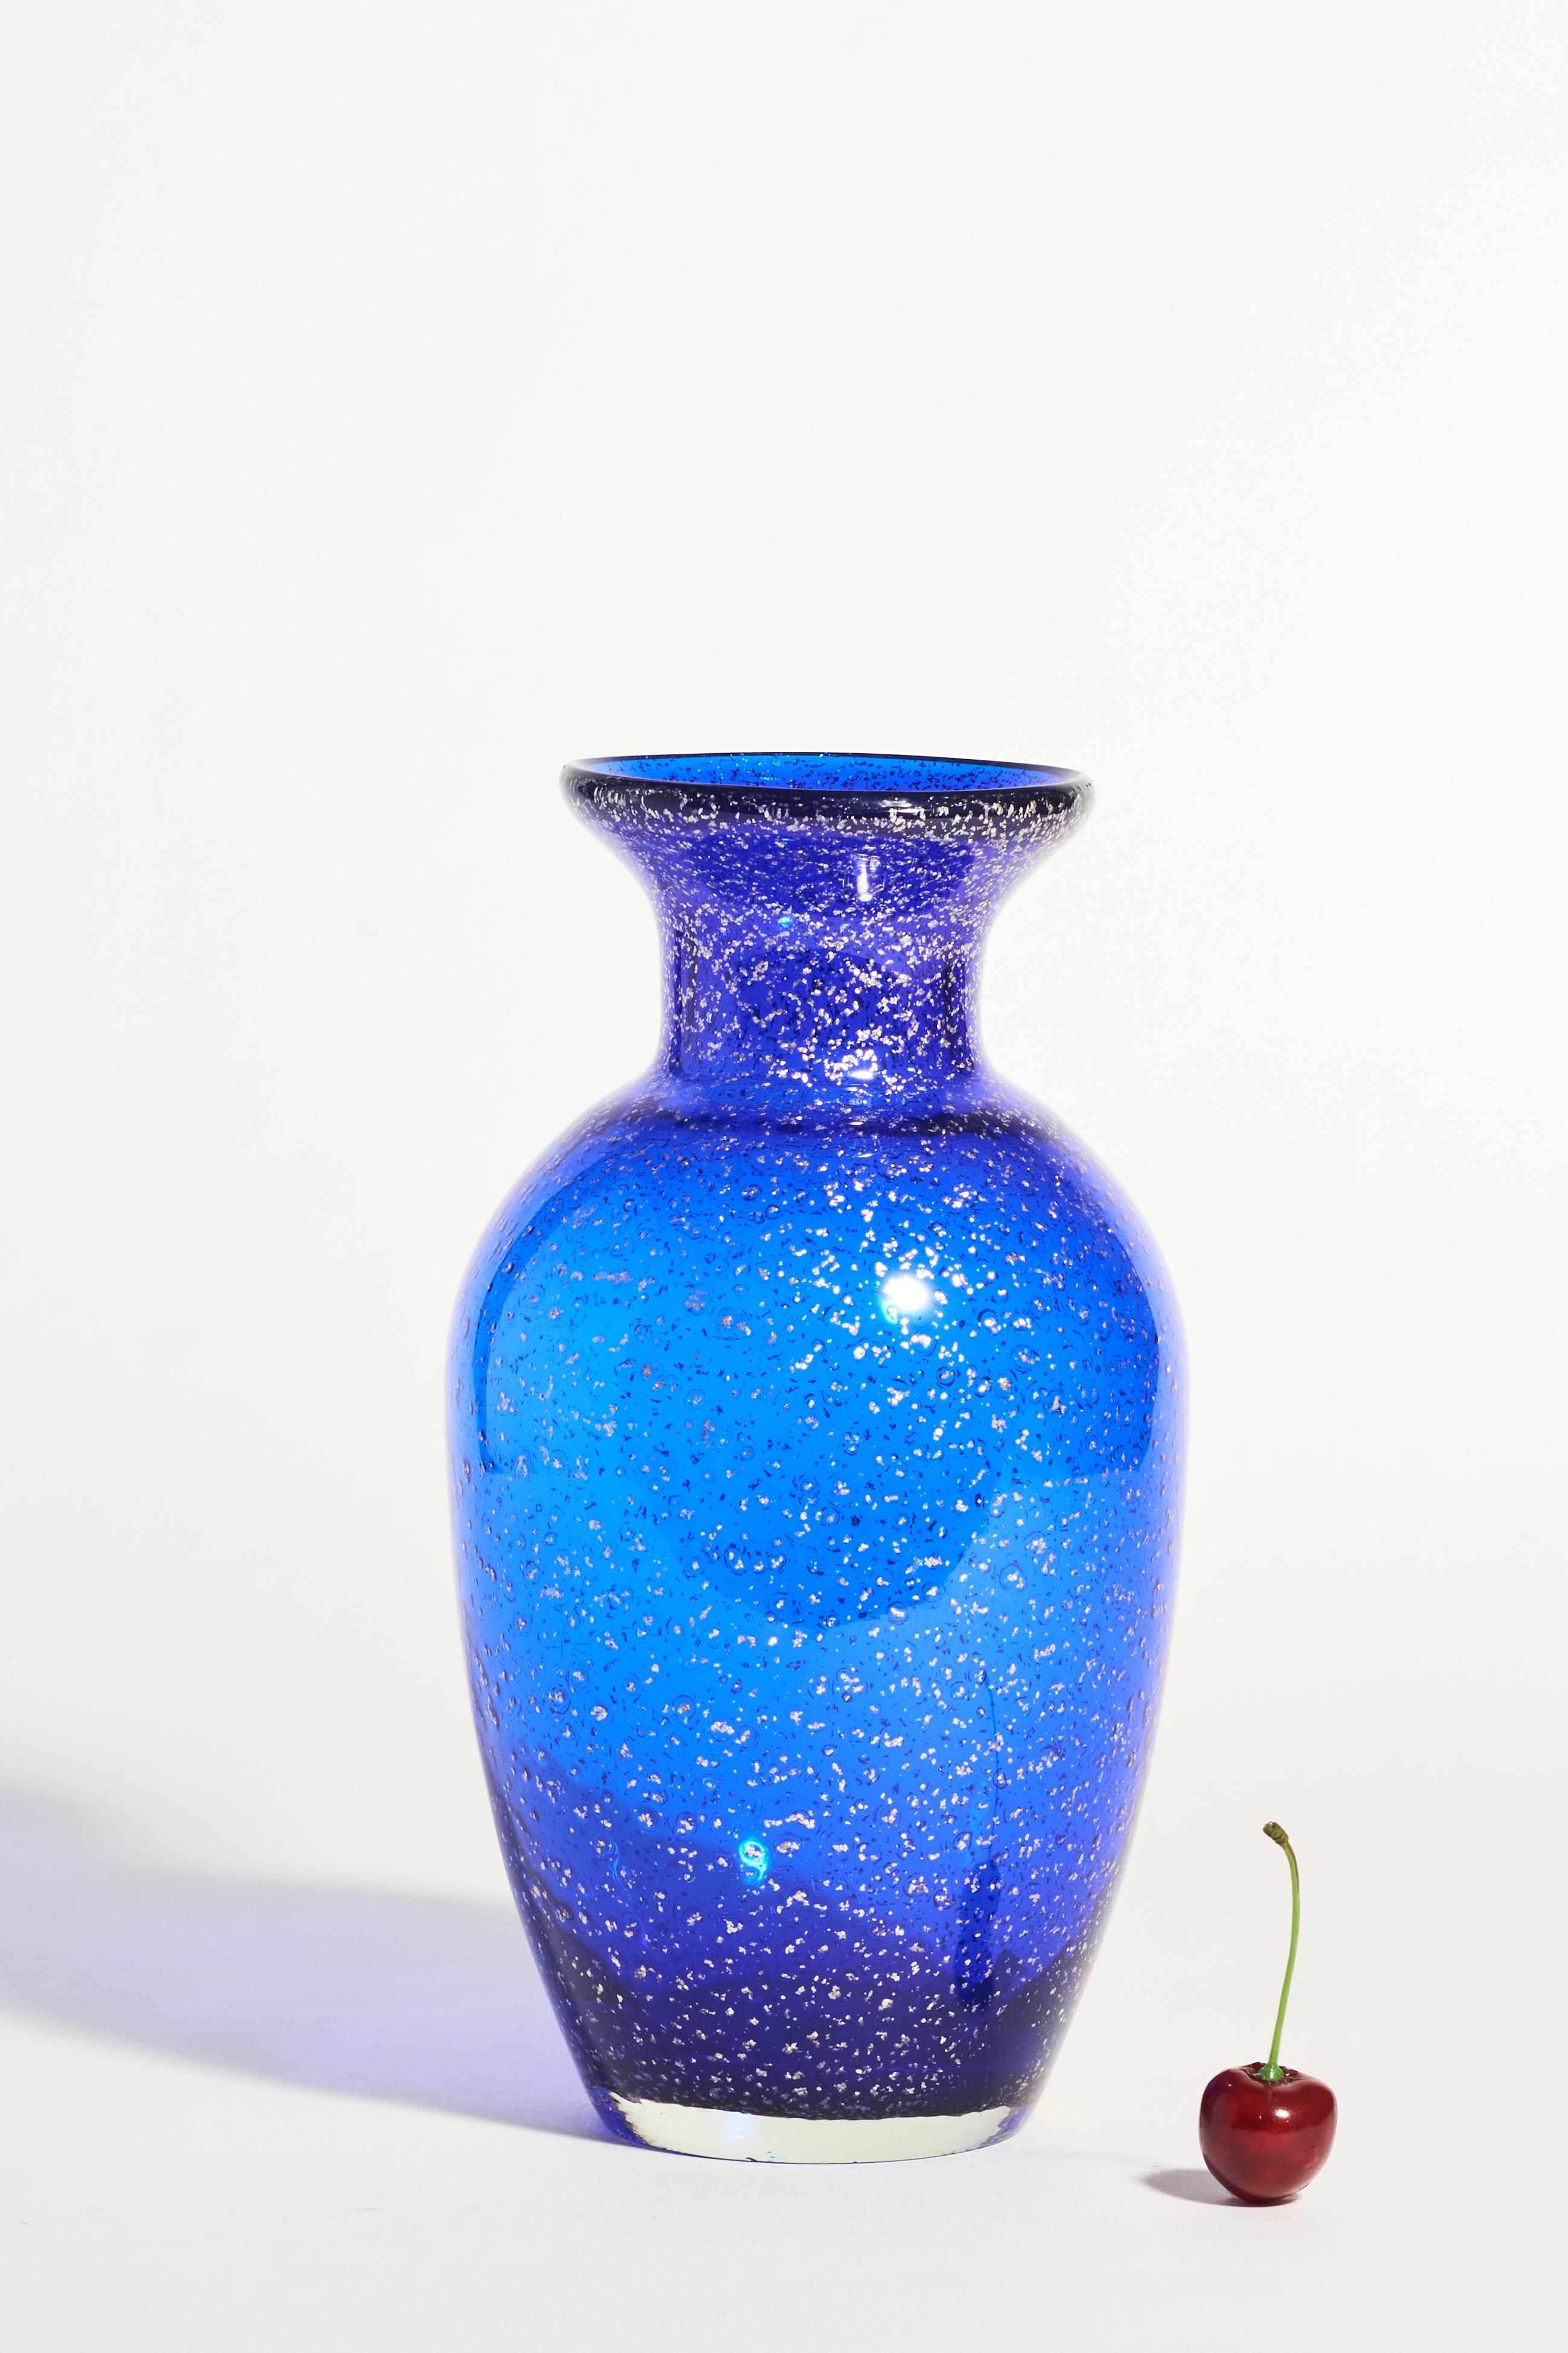 Classic urn shaped signed Murano vase in silver flecked cobalt blue glass.